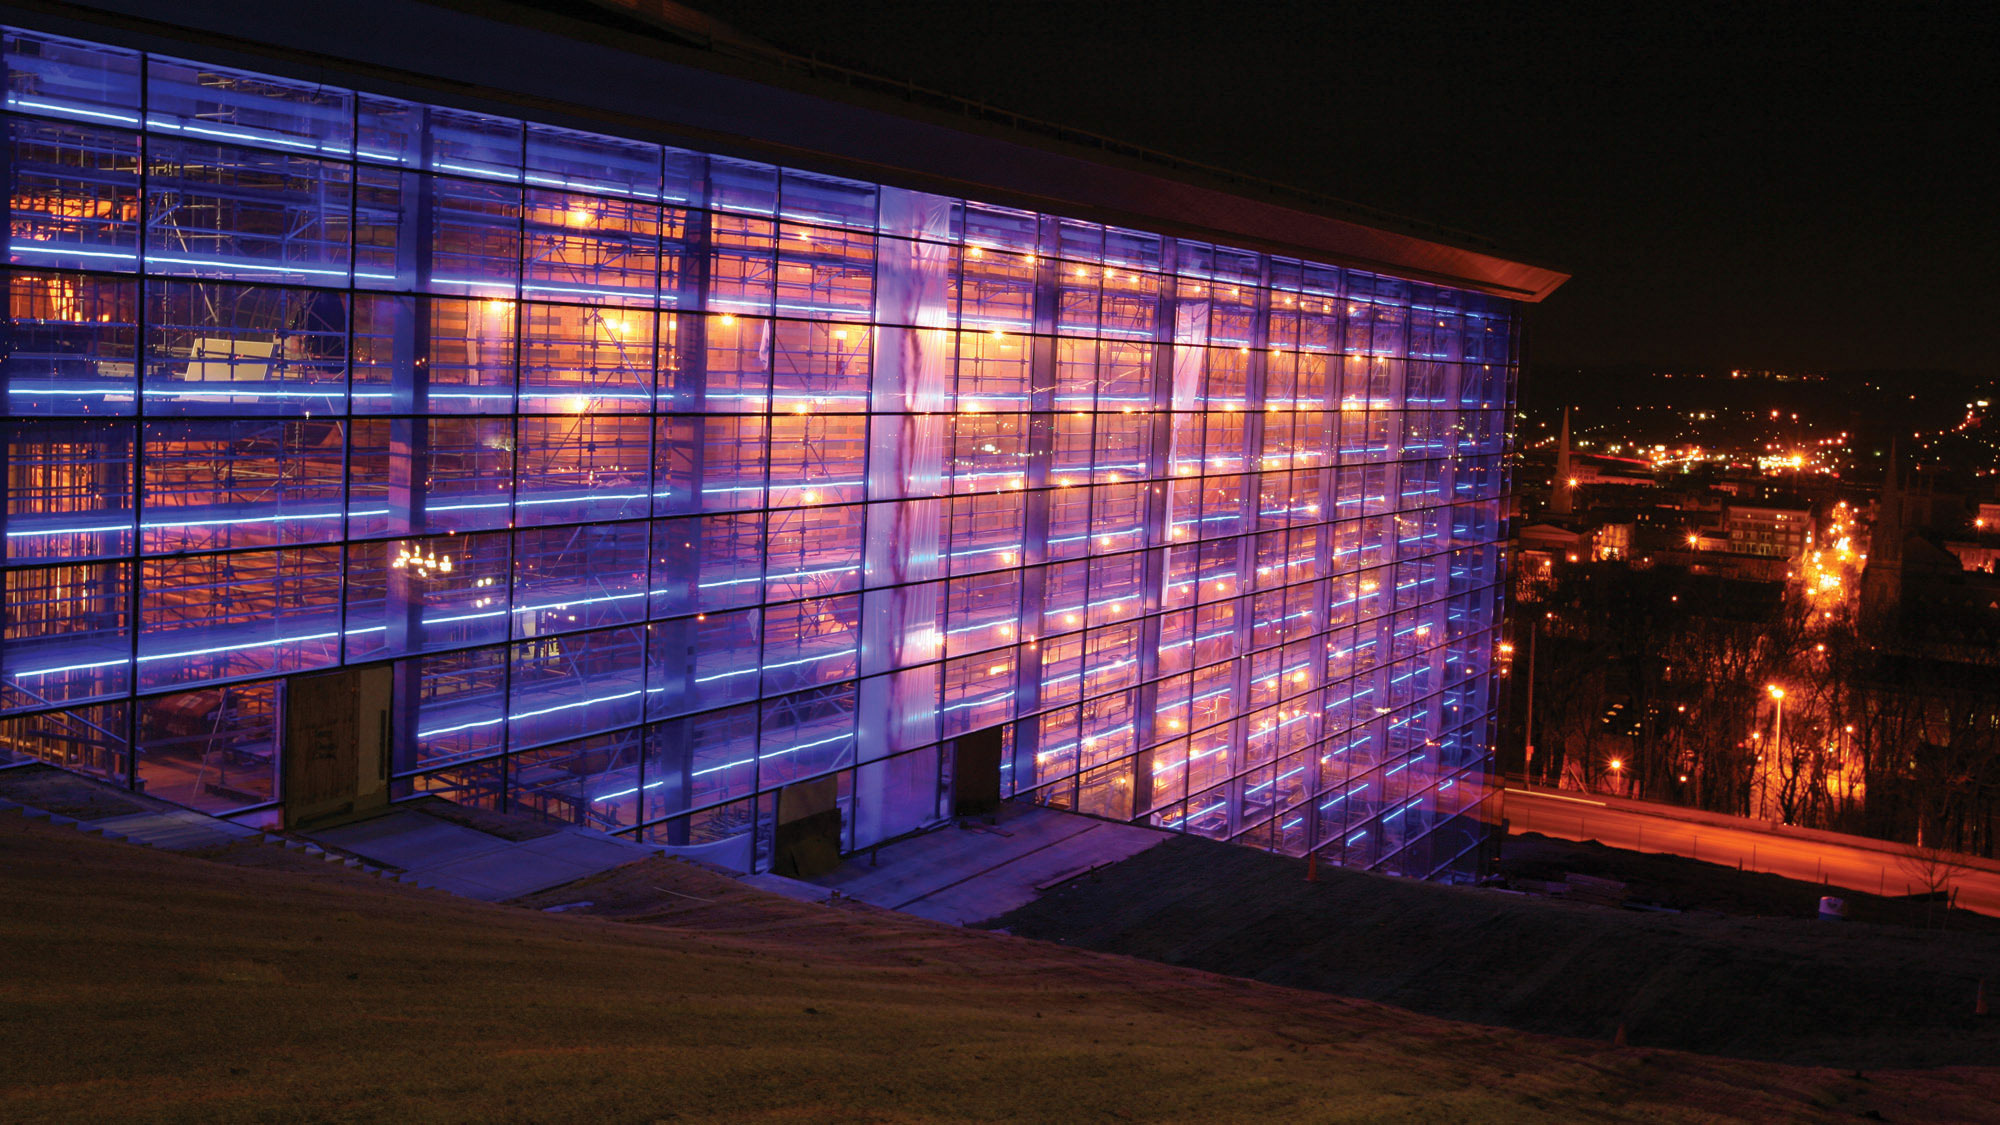 The exterior of EMPAC during construction at night lit from within with red light.  